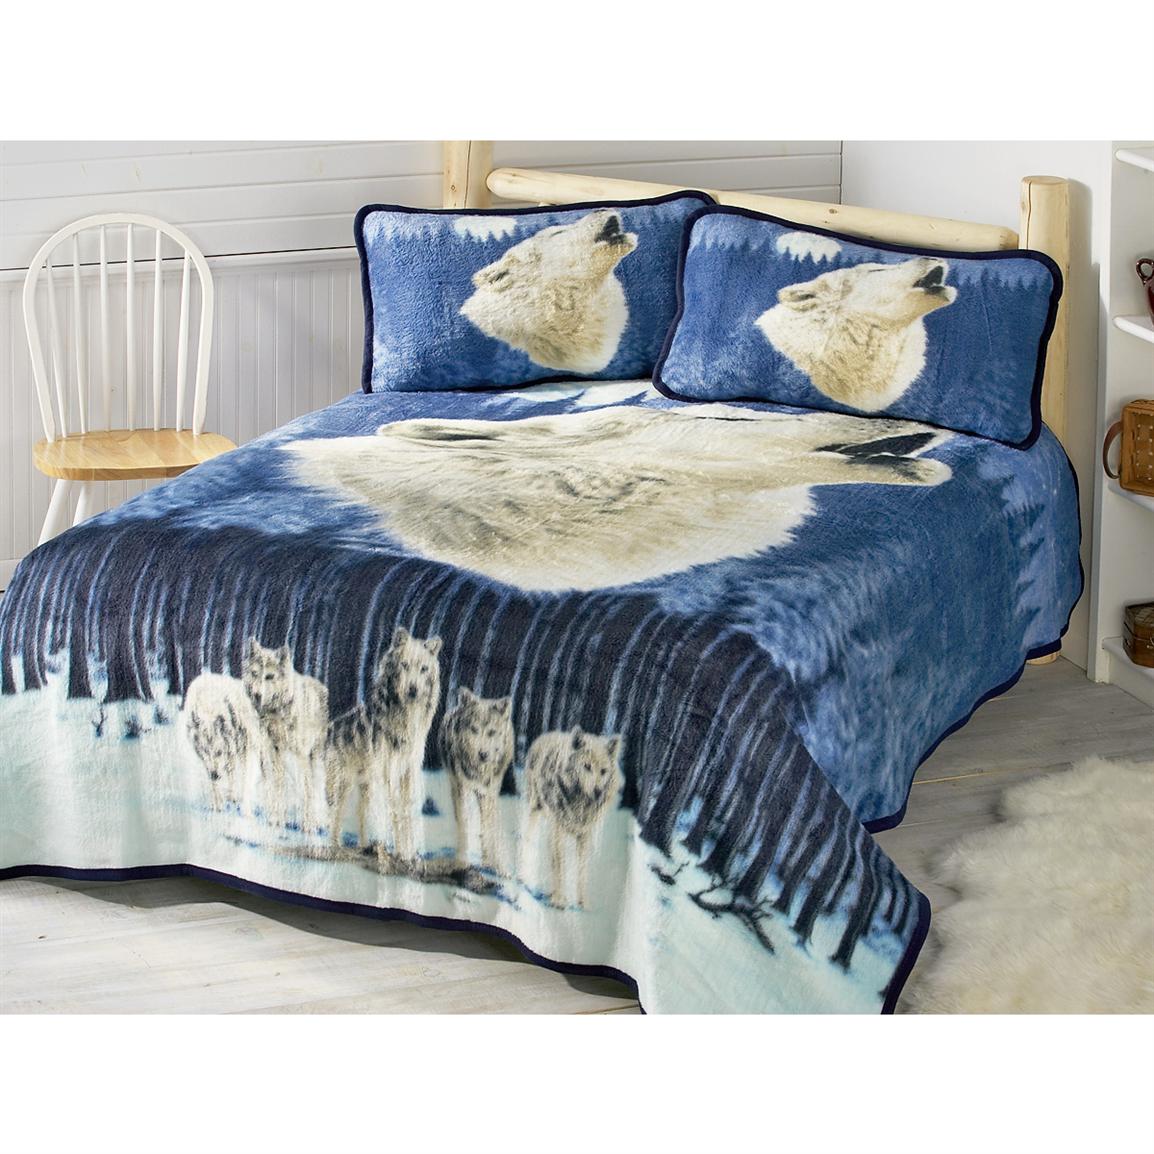 Moon Wolf Bed Blanket - 98235, Quilts at Sportsman's Guide